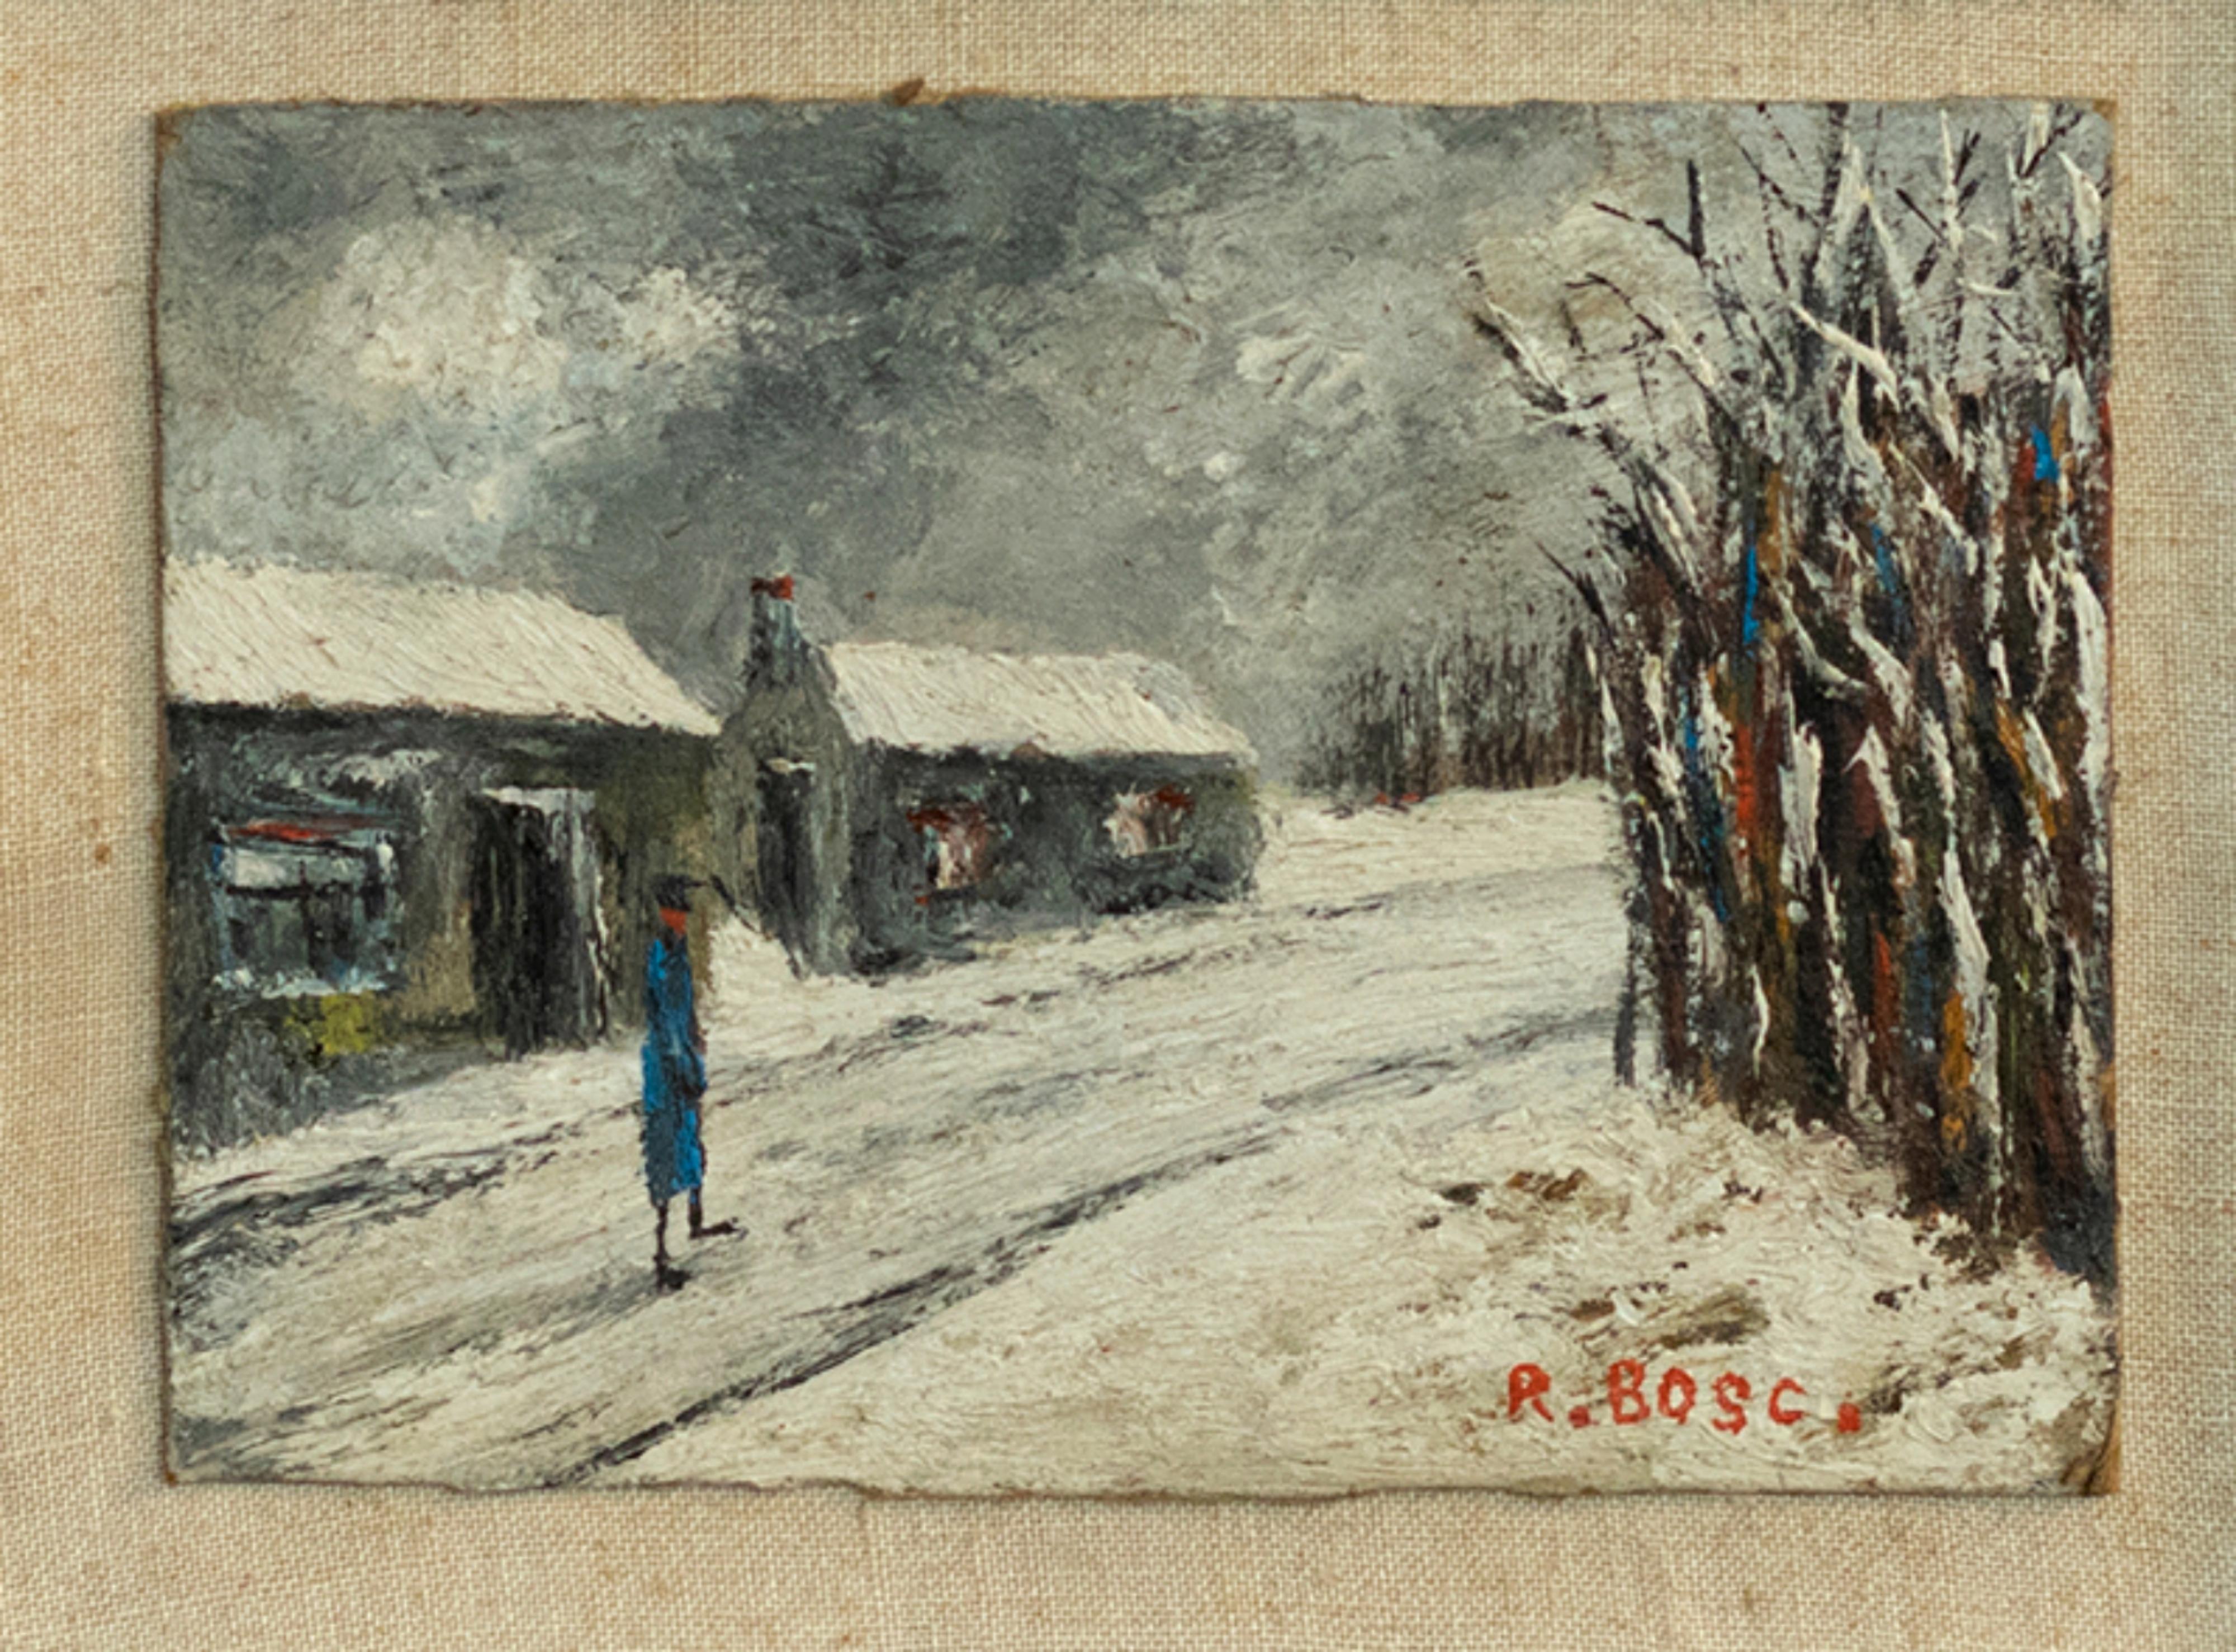 In the somber atmosphere of the Bosque de Boulogne, a lone figure walks alone, lost in thought. This evocative oil painting, executed in the early 20th century, captures the melancholic mood of the Winter season. The artist, 